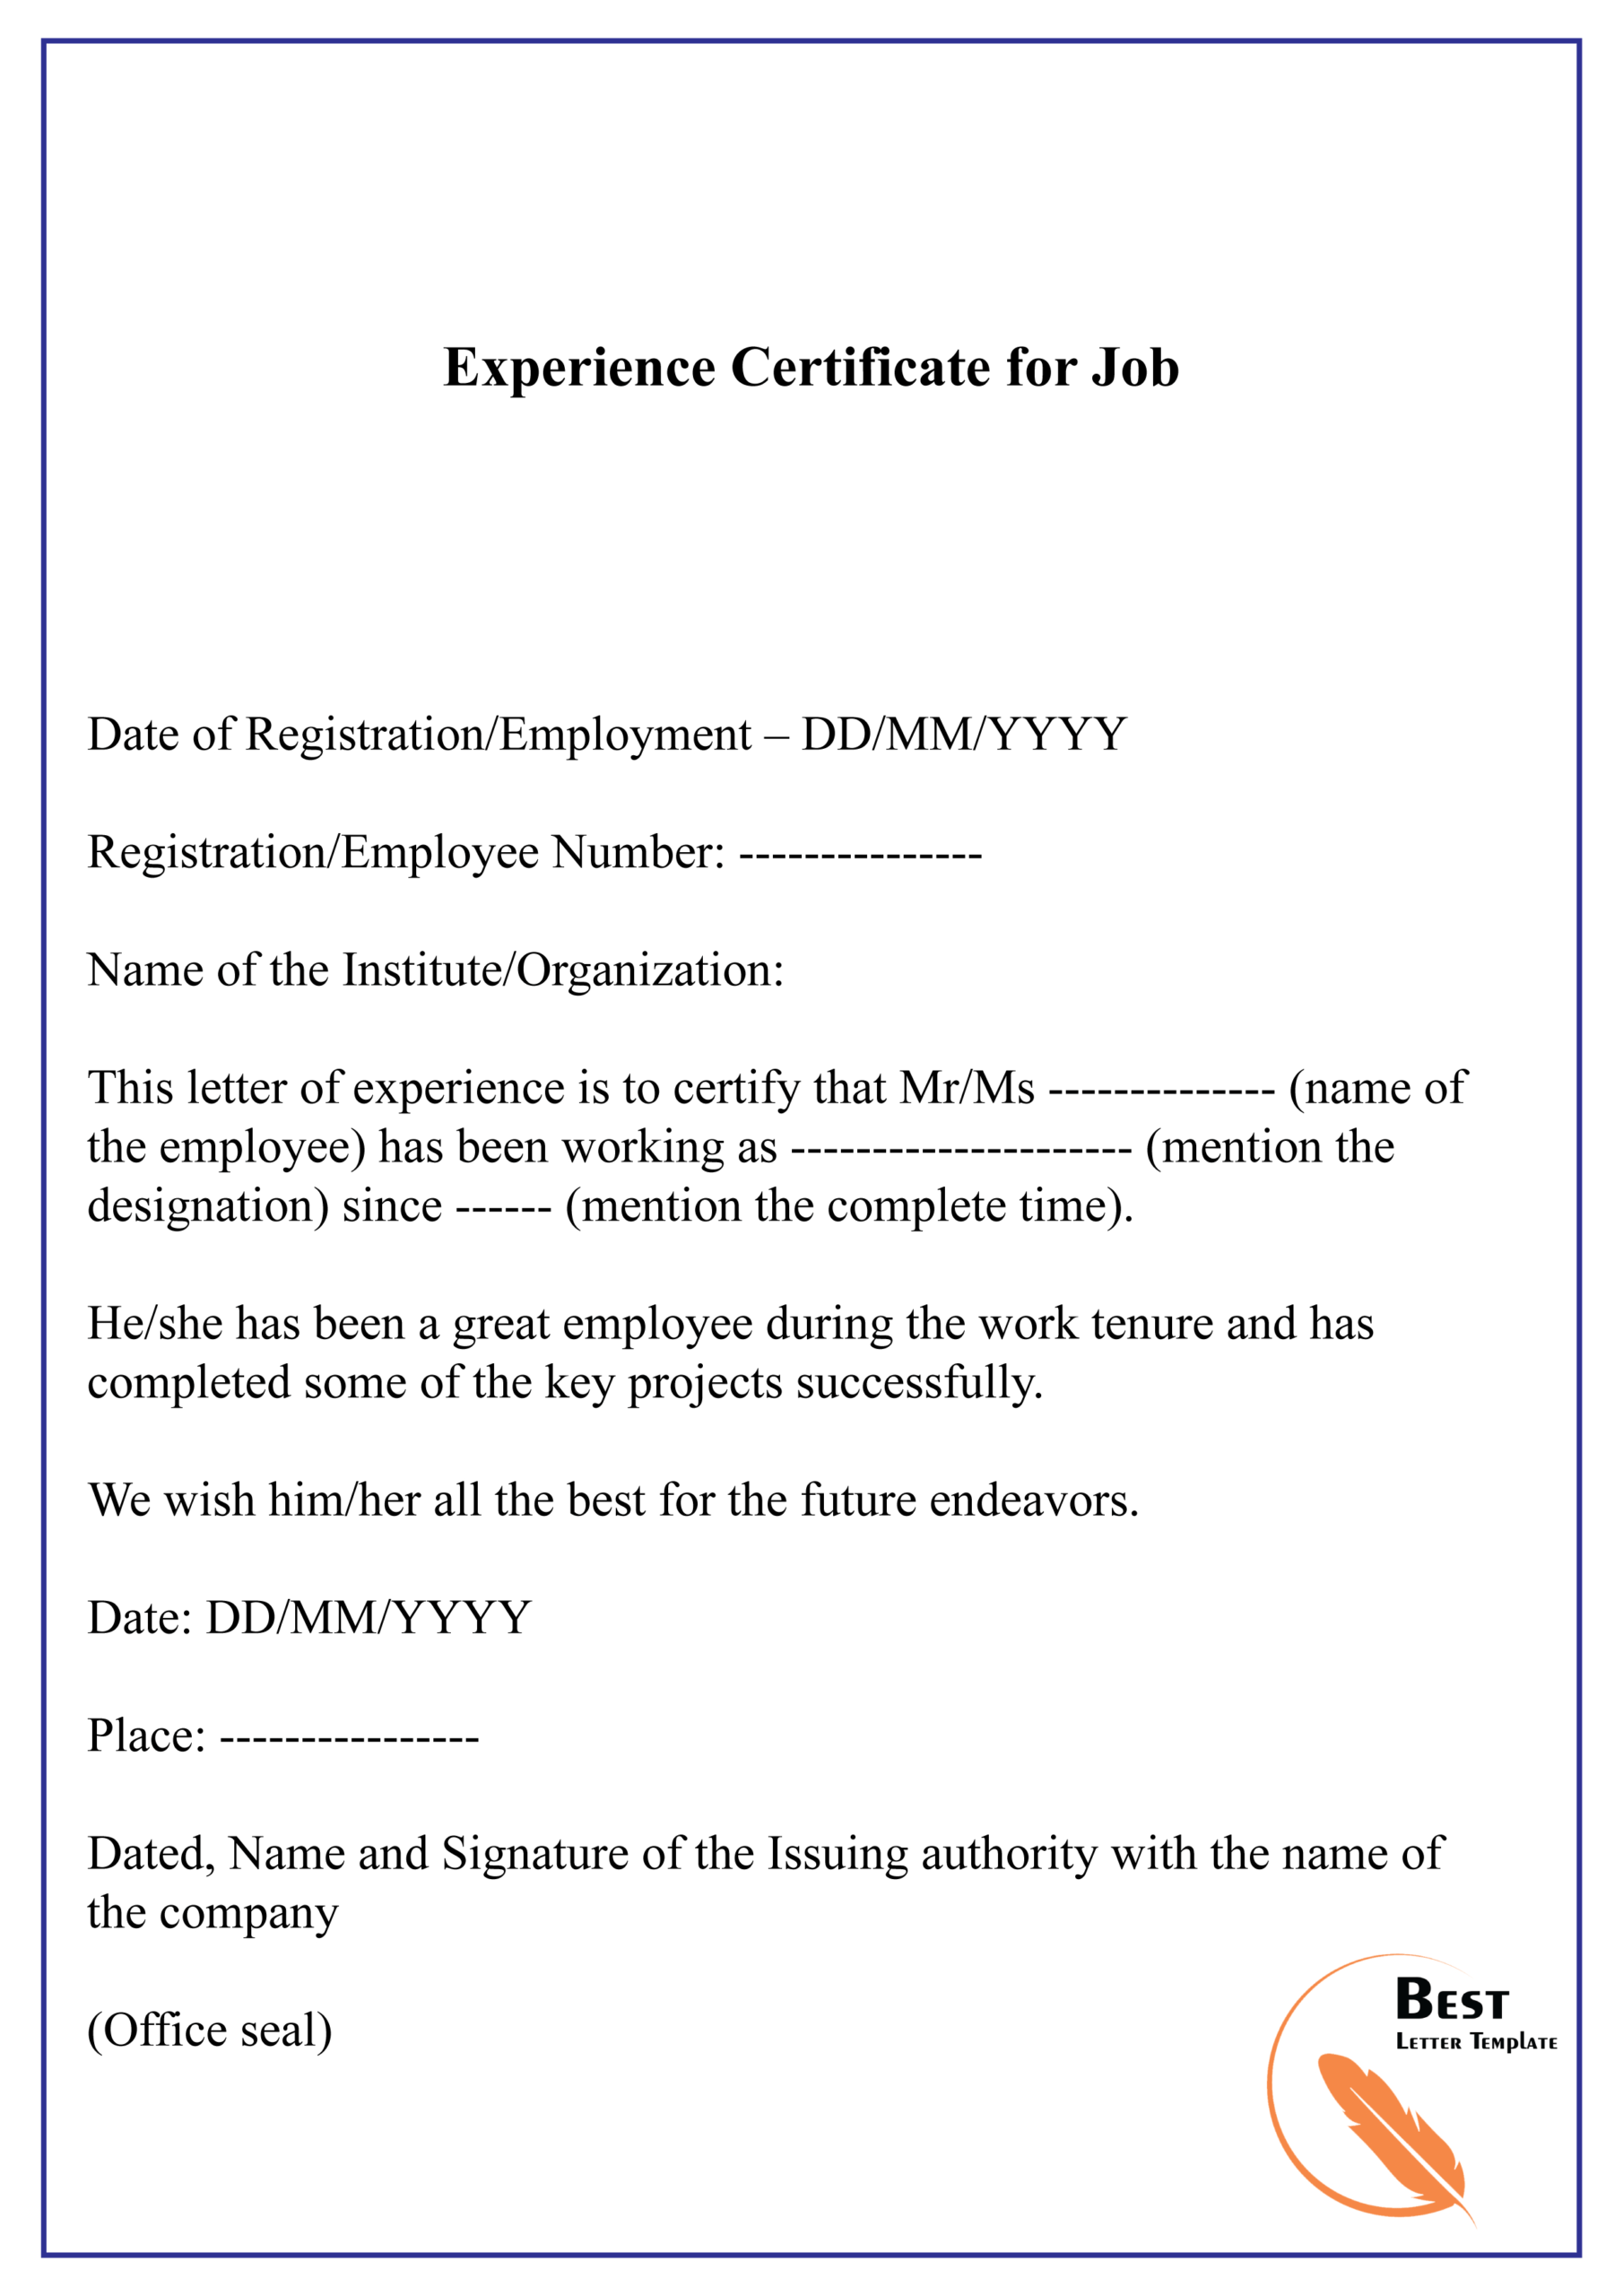 Experience Certificate For Job 01 | Best Letter Template Throughout Good Job Certificate Template